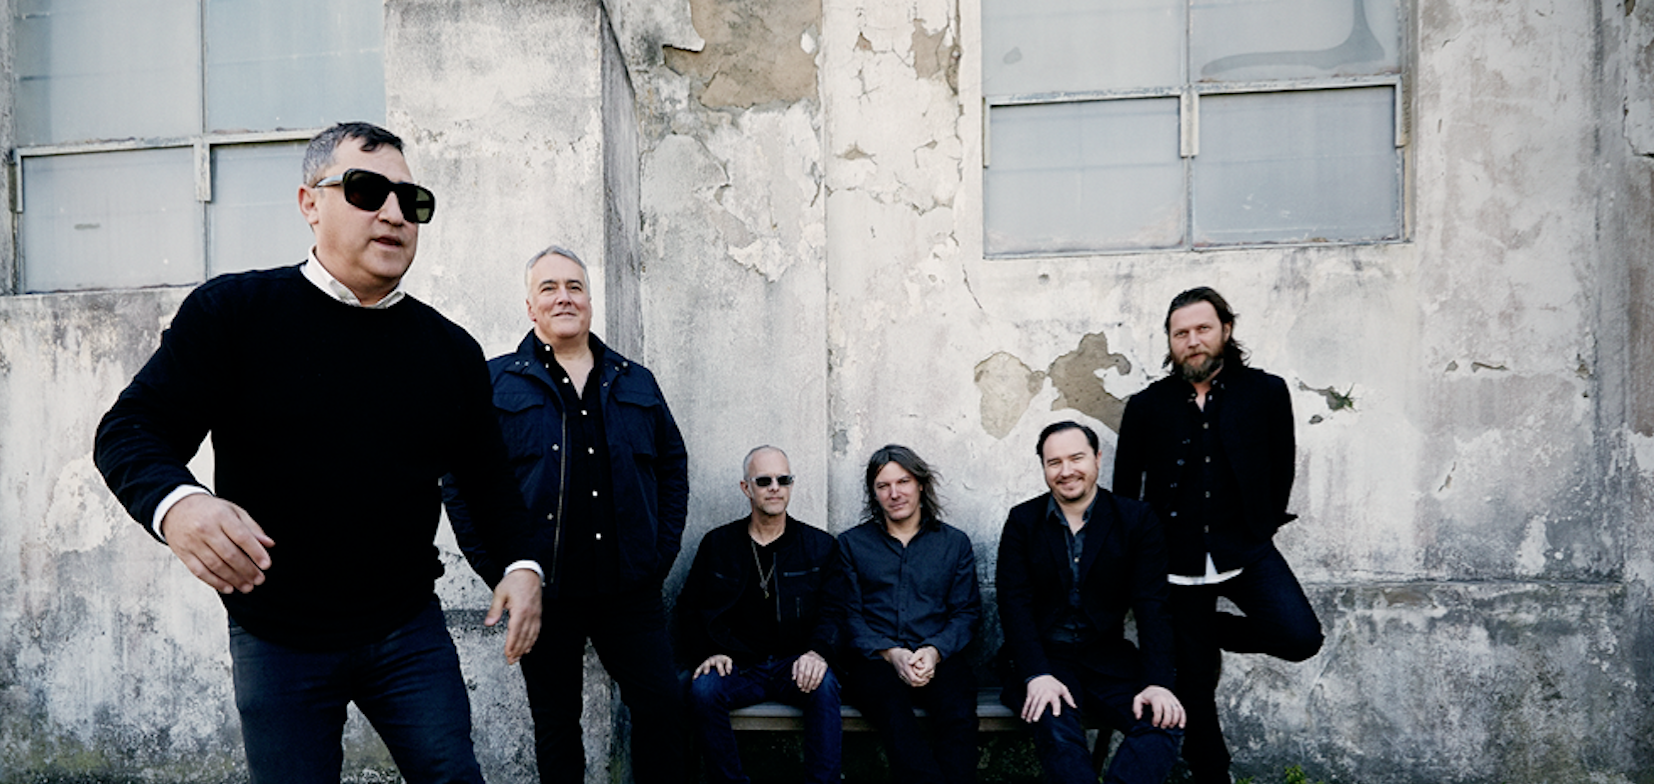 The Afghan Whigs Announces Co-Headline North American Tour with Built to Spill